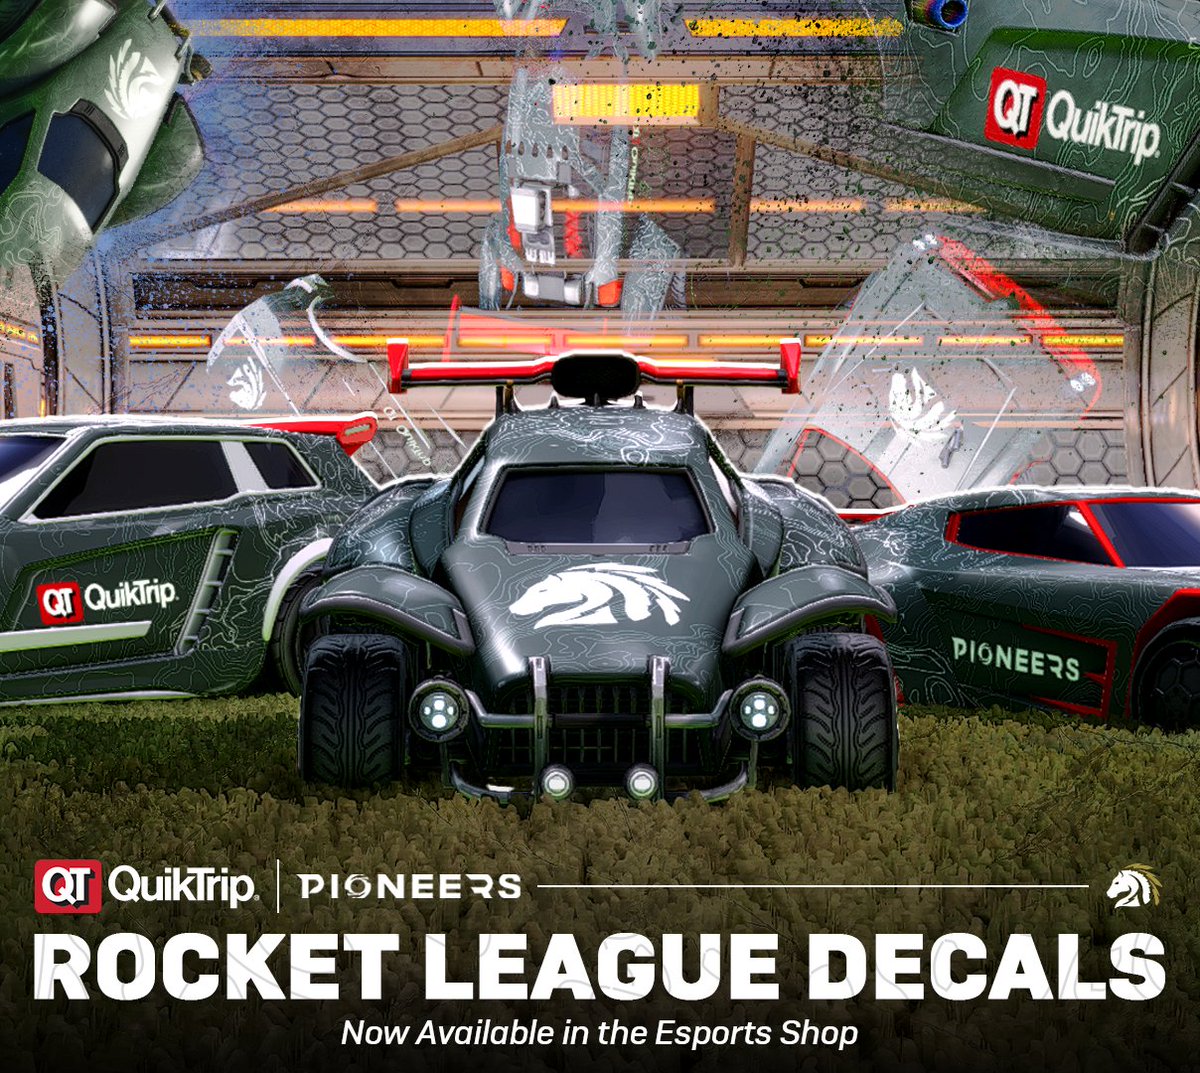 📢 THE @QuikTrip PIONEERS GAMING ROCKET LEAGUE DECALS ARE NOW AVAILABLE FOR PURCHASE IN THE ESPORTS SHOP 🚨 Share your clips using the decal with '#QTPG' and we'll follow you back ✅